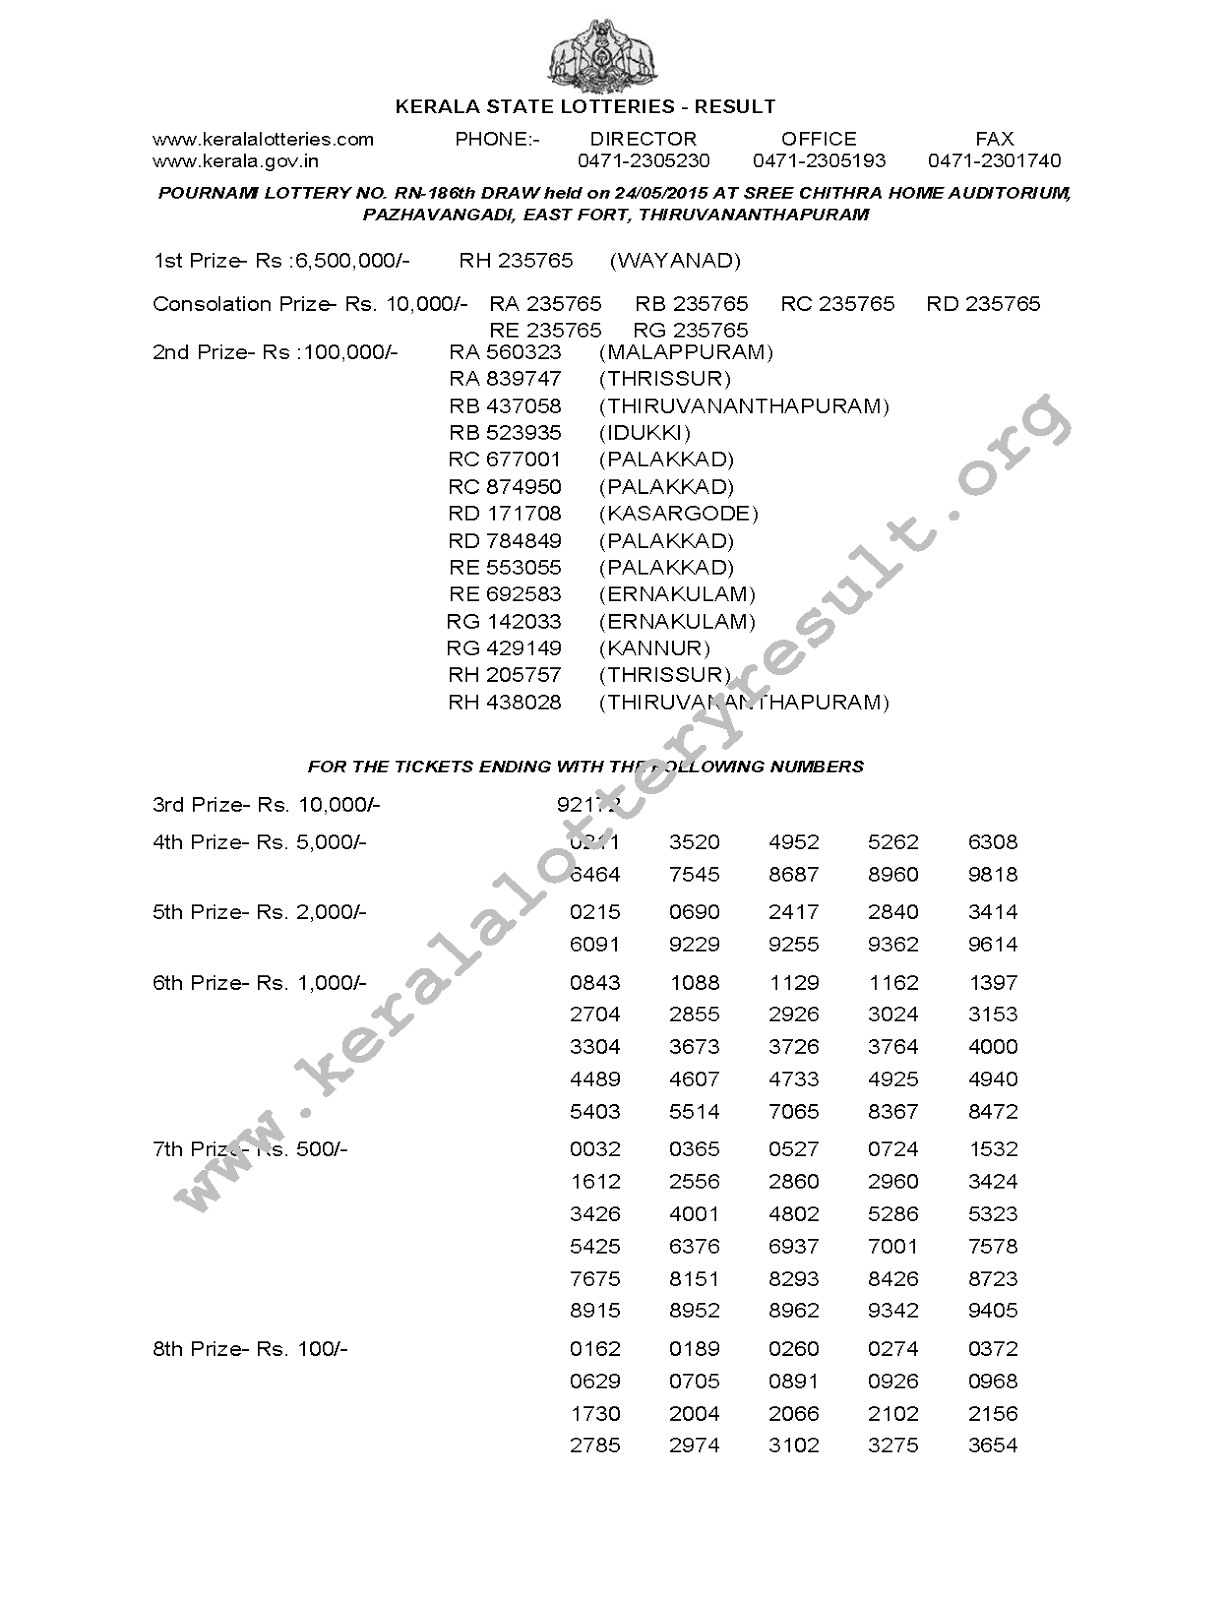 POURNAMI Lottery RN 186 Result 24-5-2015